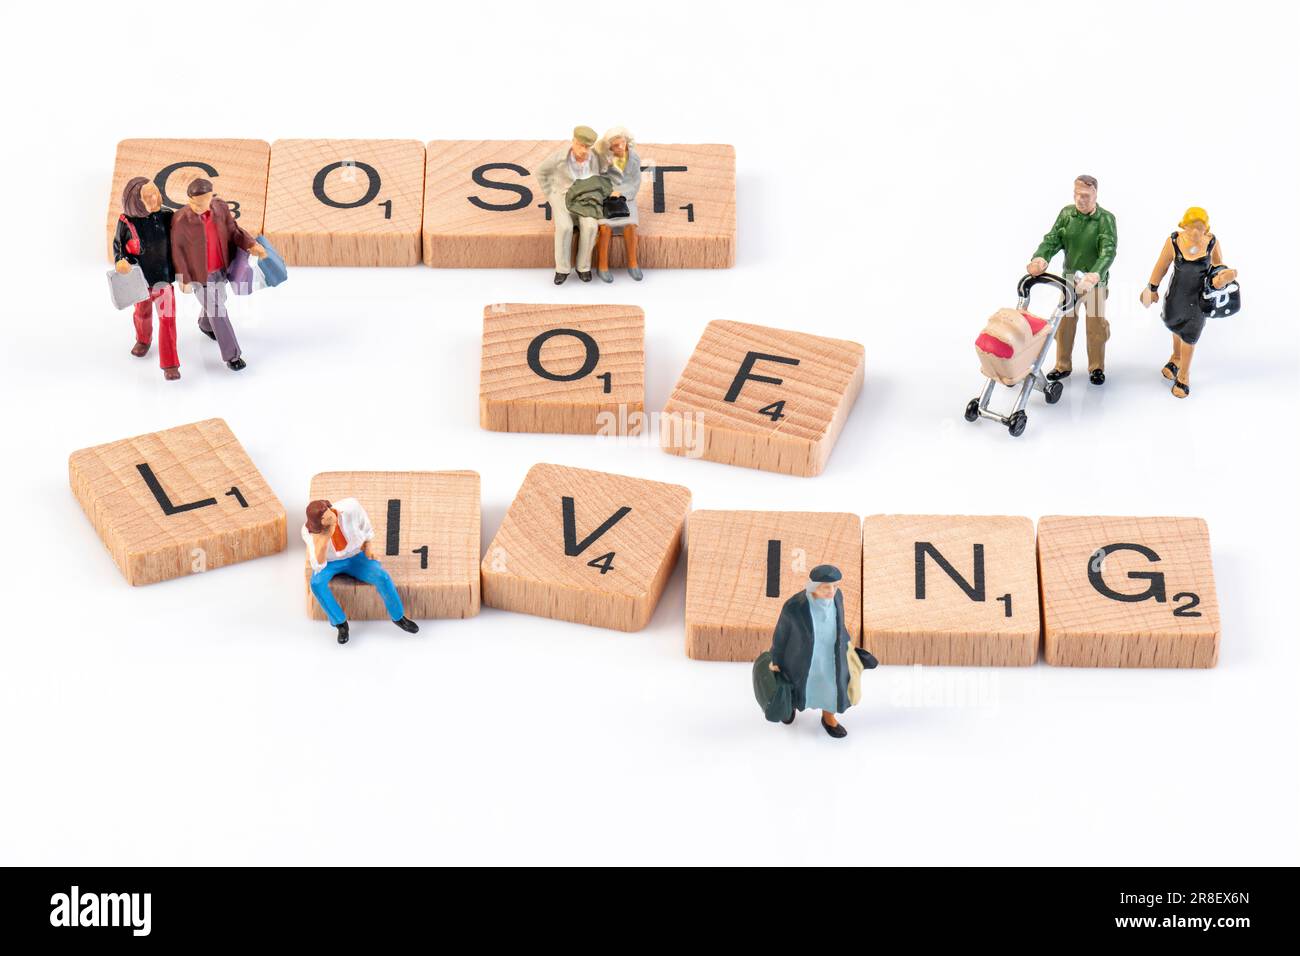 Cost of Living - Wooden Scrabble letters arranged to spell 'Cost of Living' surrounded by small figurines depicting various age groups. Stock Photo